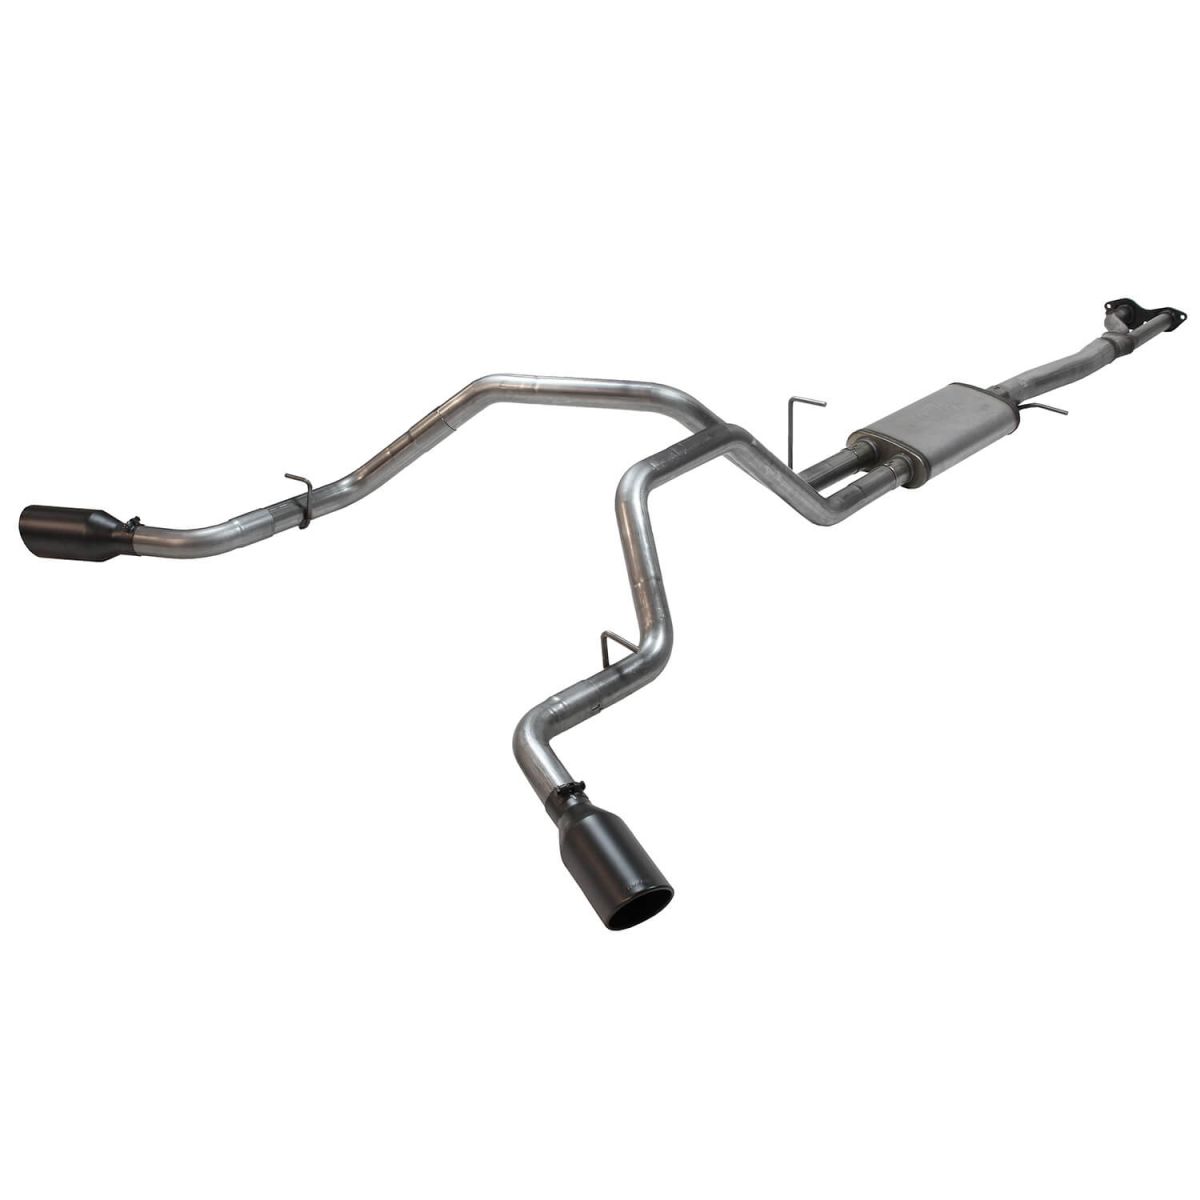 Flowmaster - Flowmaster FlowFX Dual Exit Cat-Back Exhaust System For 1996-1999 GM 1500 5.7L